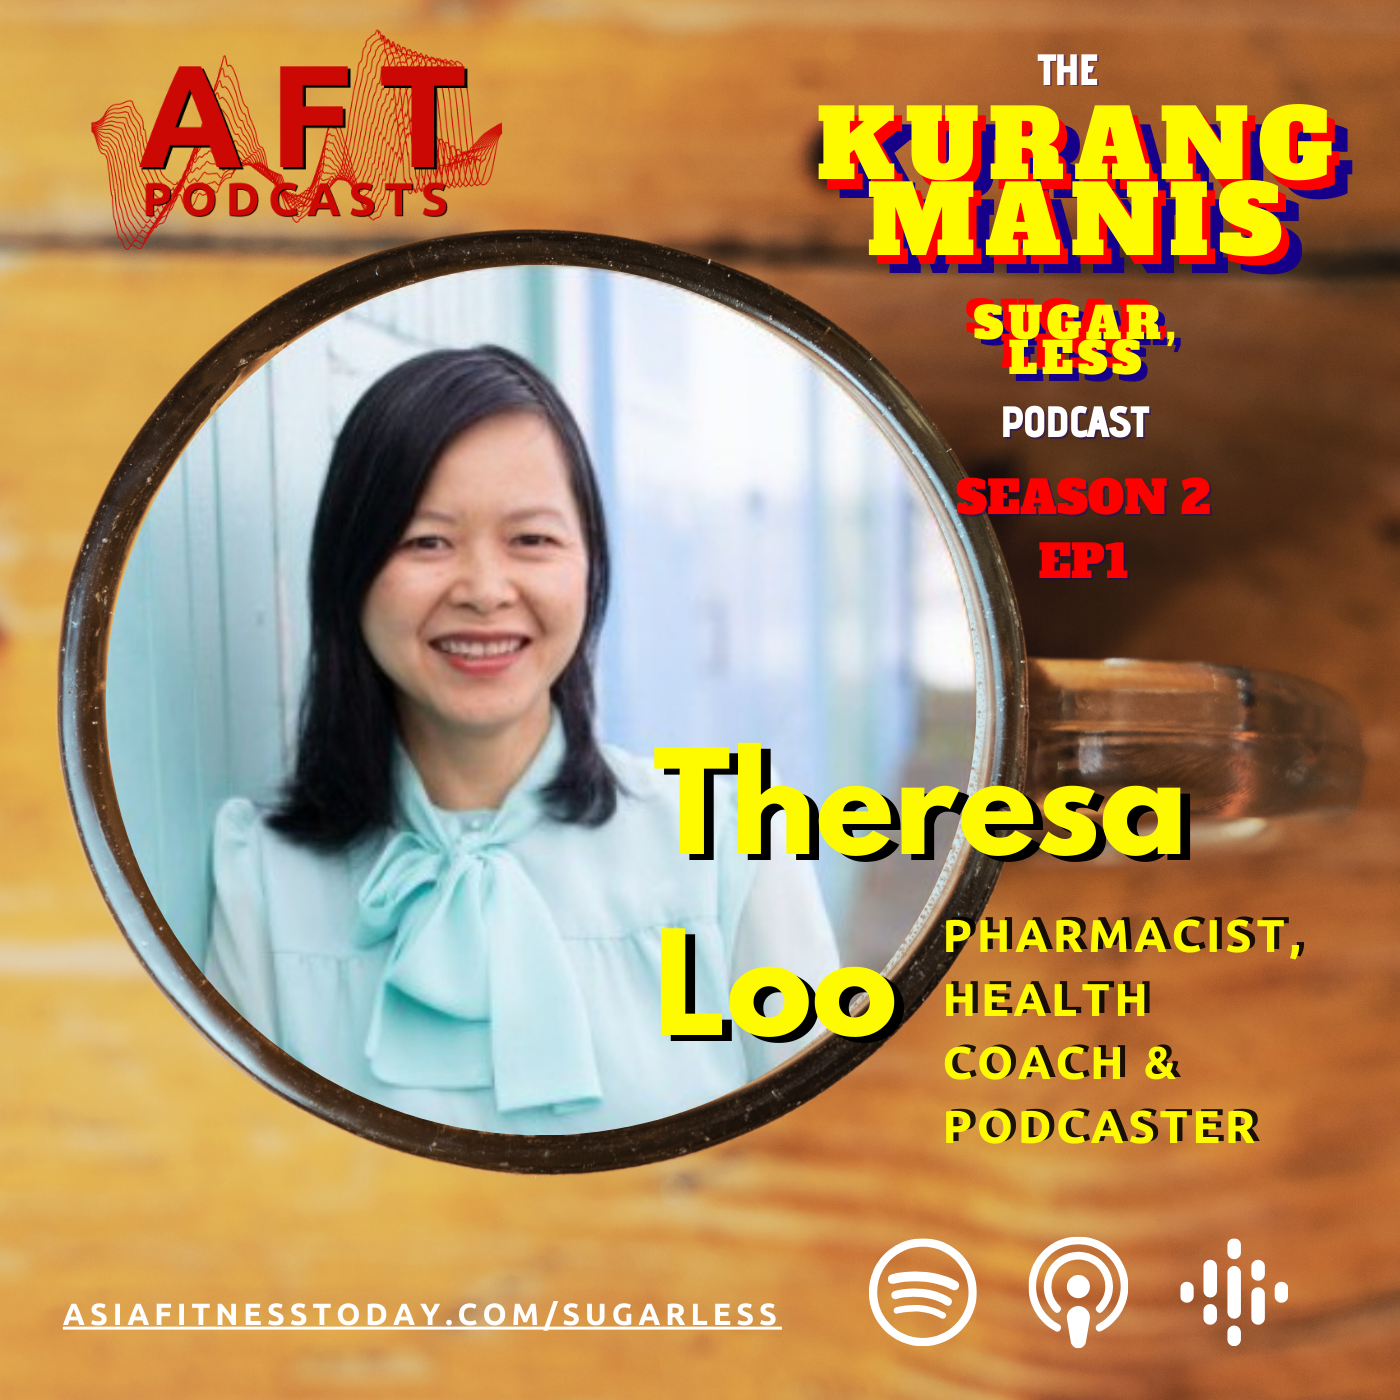 The Kurang Manis (Sugar,Less) Podcast Cover featuring Theresa Loo, Pharmacist, Health Coach and Podcaster